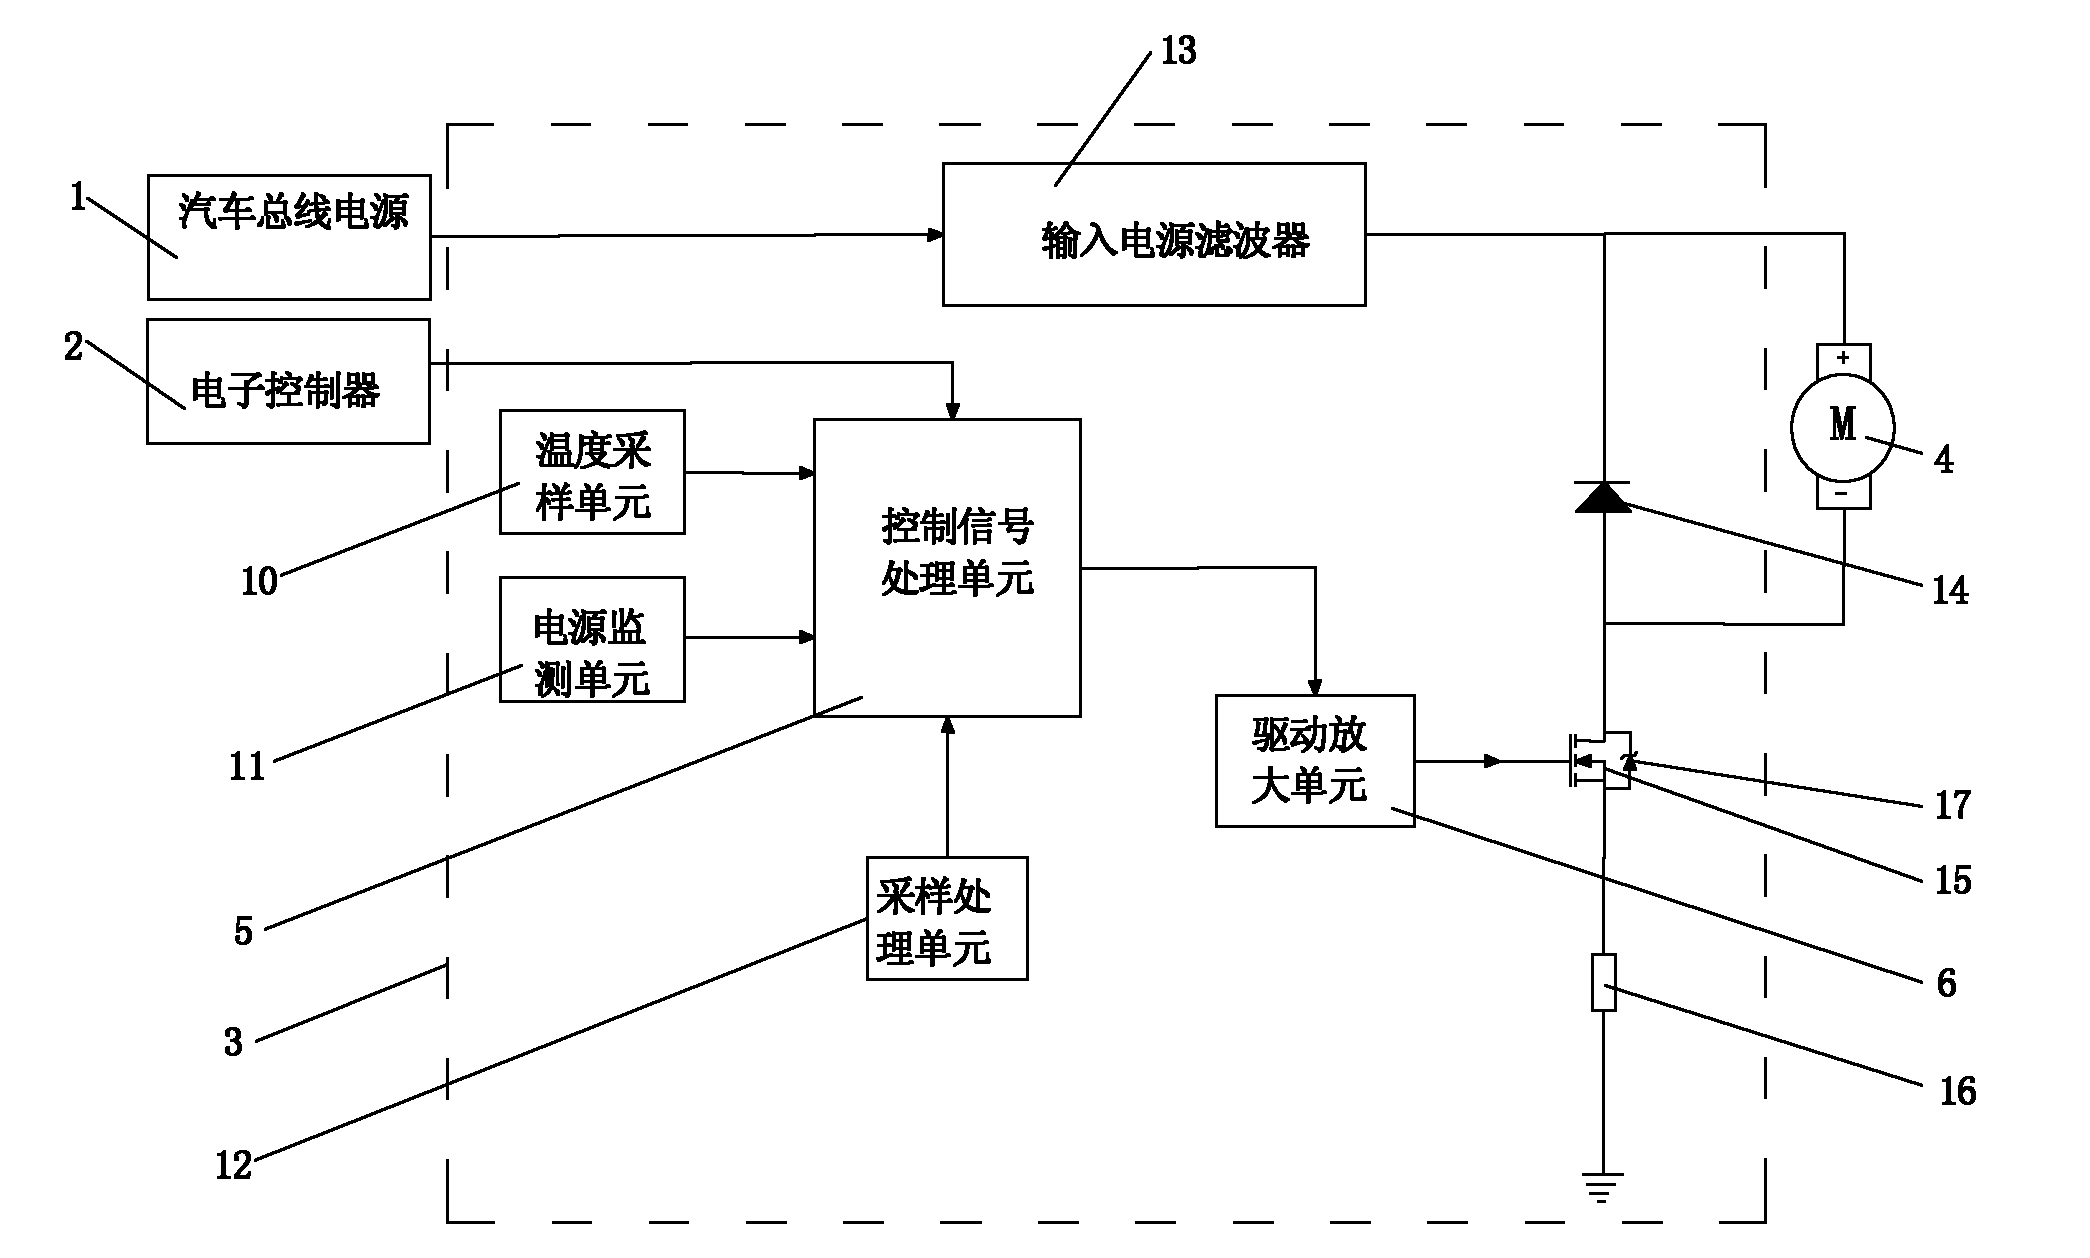 PWM (Pulse Wavelength Modulation) speed regulating module for cooling fan of automobile engine